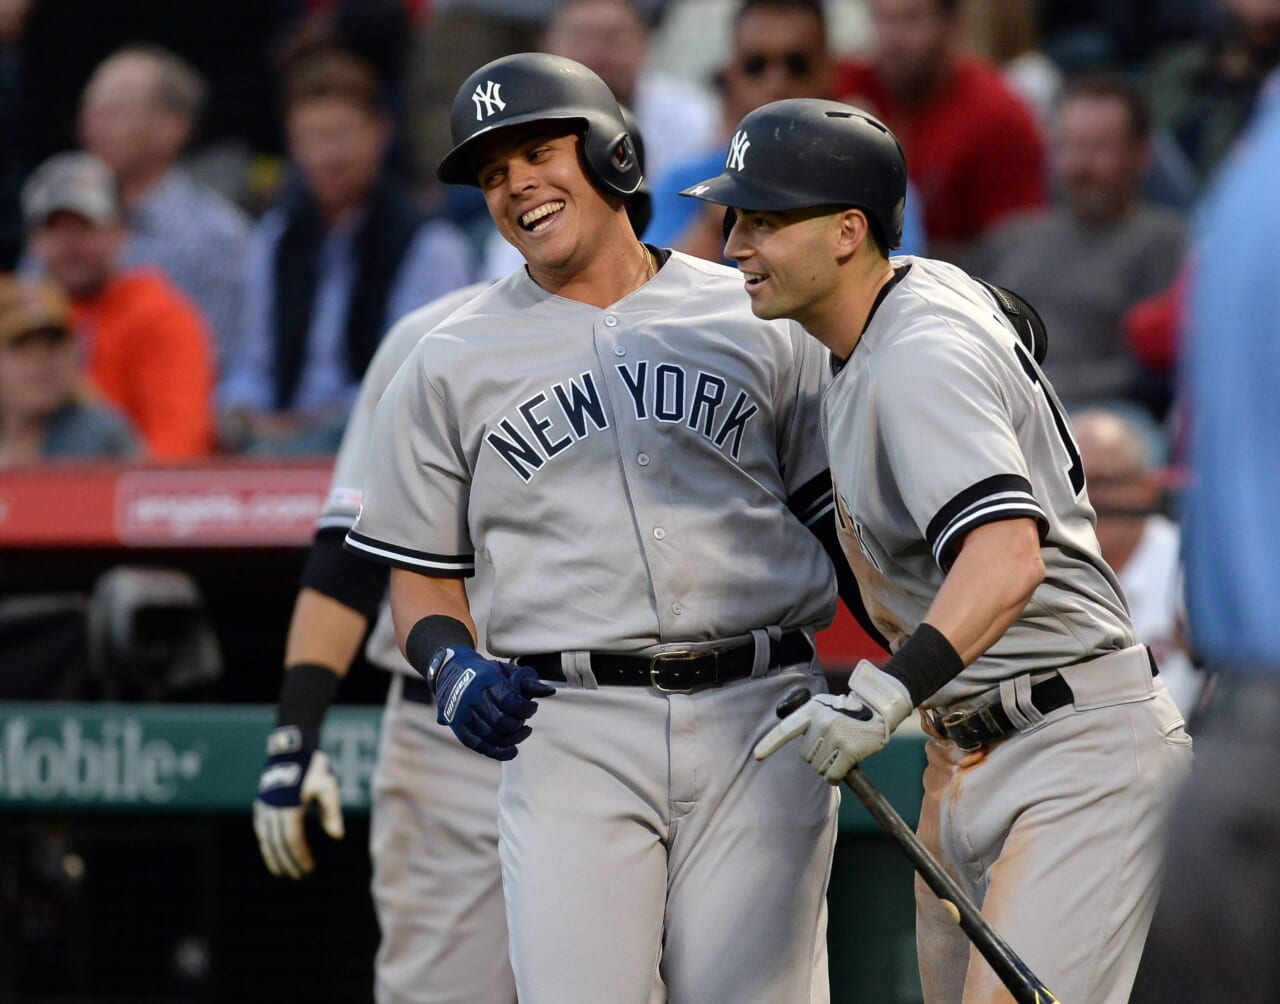 New York Yankees: Things to Watch for the West Coast Trip